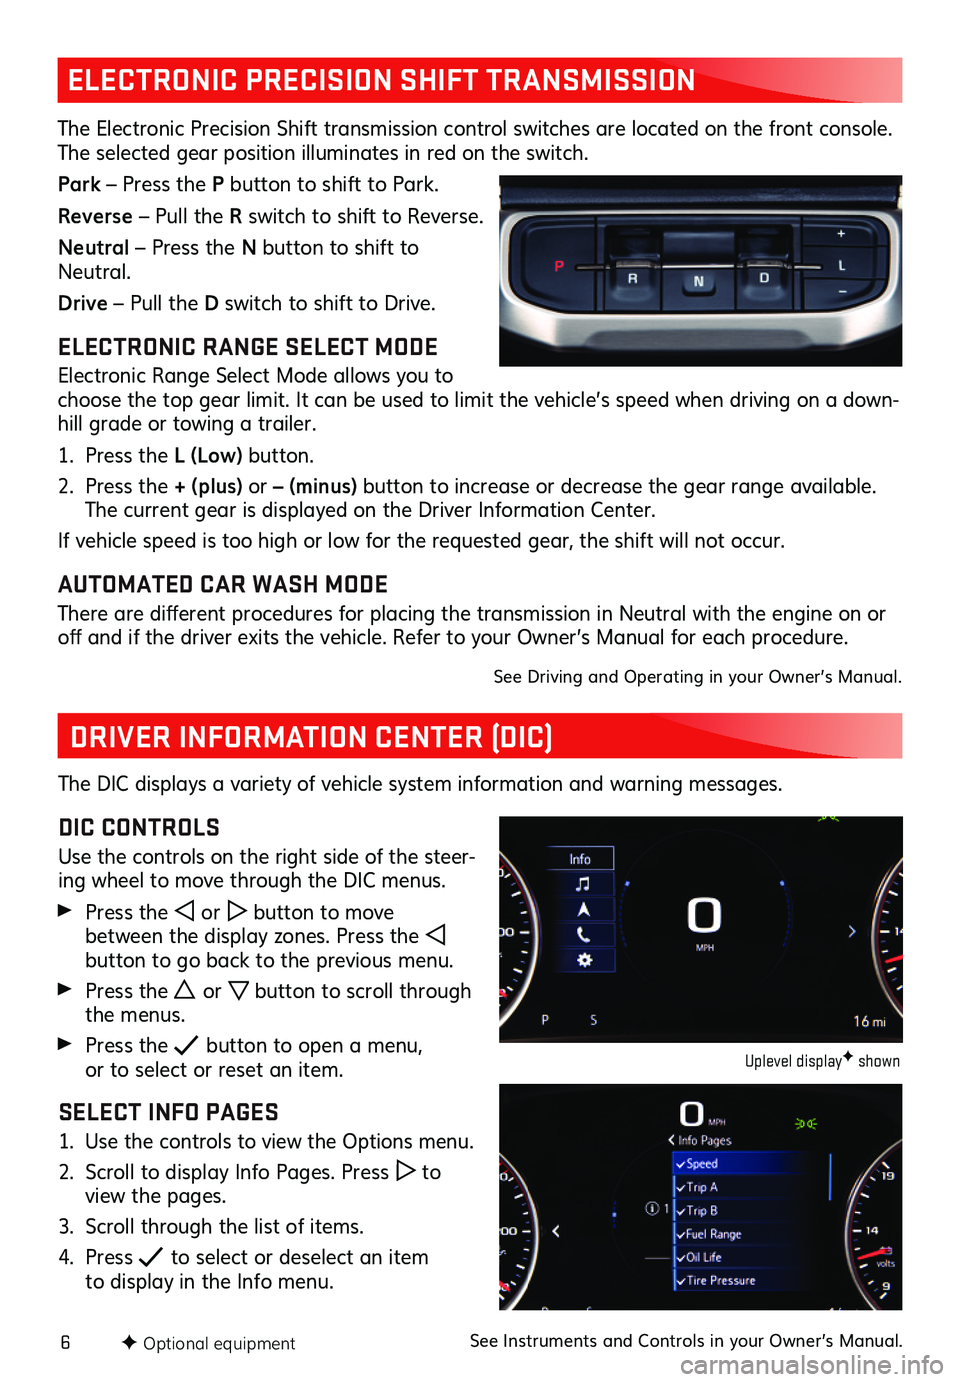 GMC ACADIA 2020  Get To Know Guide 6F Optional equipment
ELECTRONIC PRECISION SHIFT TRANSMISSION 
The Electronic Precision Shift transmission  control switches are located on the front  console. The selected gear position illuminates i